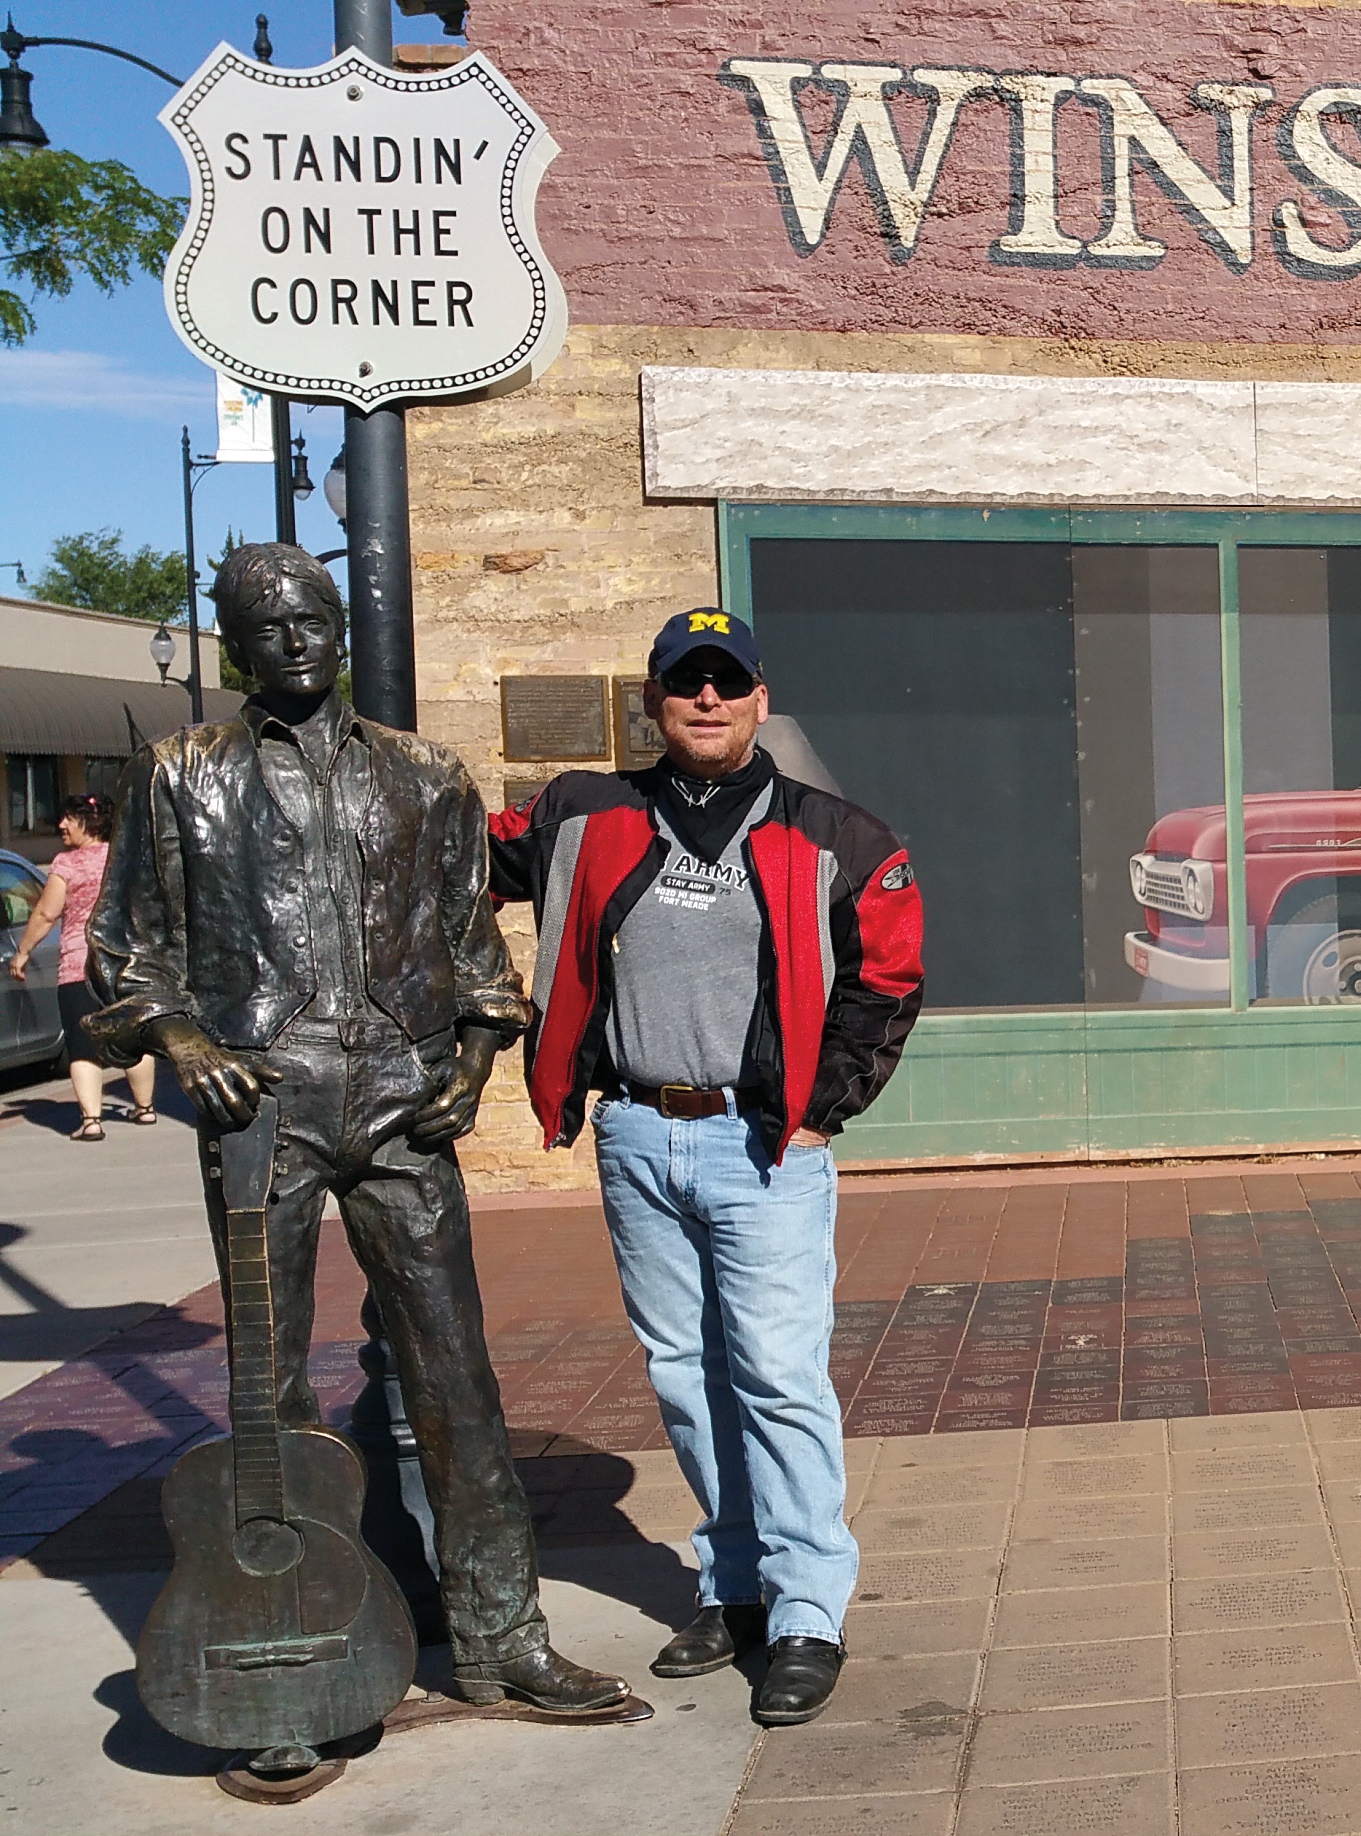 Gordon Walker, ’87, is “standin’ on the corner in Winslow, Arizona,” one of many stops as he rode his motorcycle across the country. He made the trek, including the entirety of Route 66, to celebrate his retirement from the U.S. Army after 28 years of service.